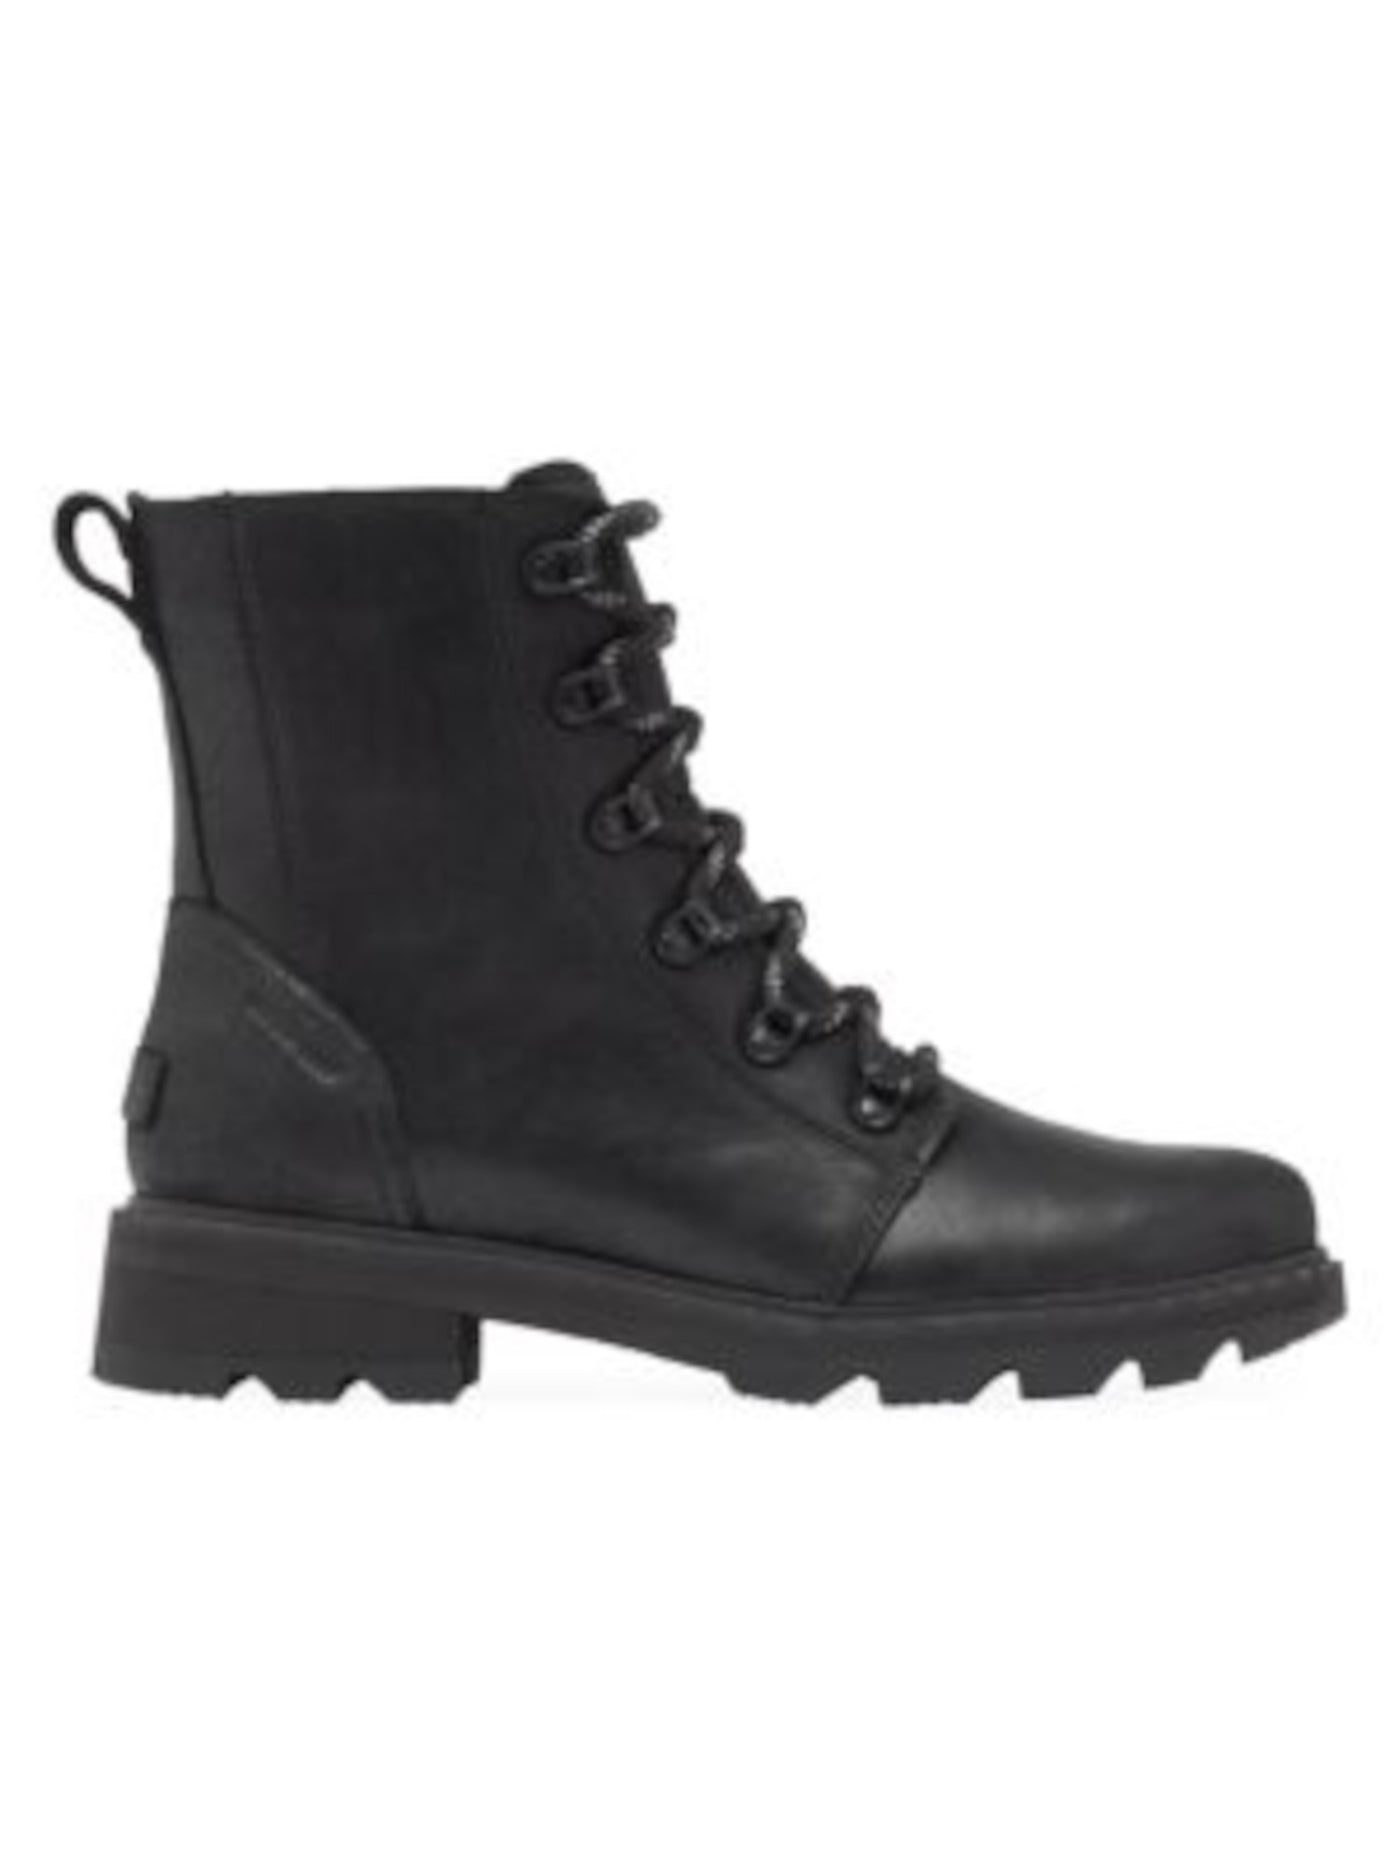 SOREL Womens Black Name At Heel Waterproof Padded Lennox Round Toe Lace-Up Leather Combat Boots 5.5